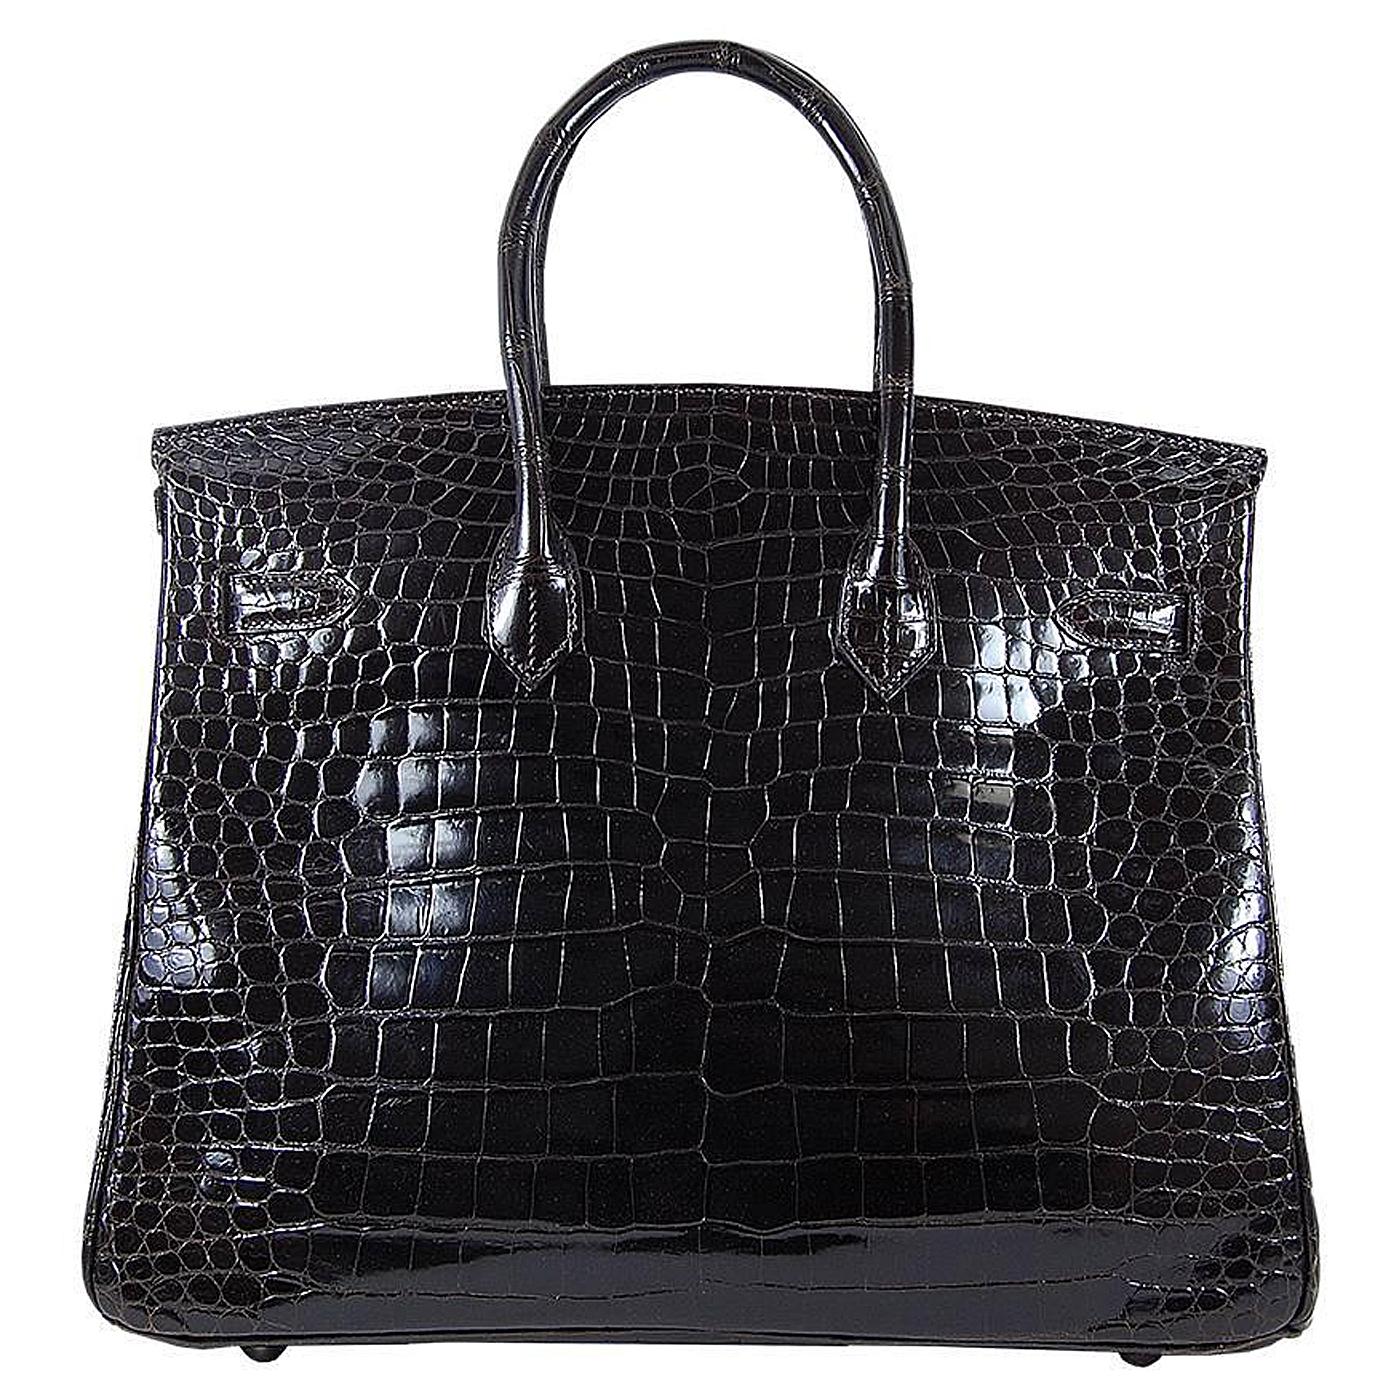 This Hermes Birkin, in the Retourne style, is in Tote with Silver hardware, Today, the Birkin bag from Hermes, designed in a gorgeous shape and made with the most luxurious leathers and skins, is worn on the arms of celebrities and millionaires as